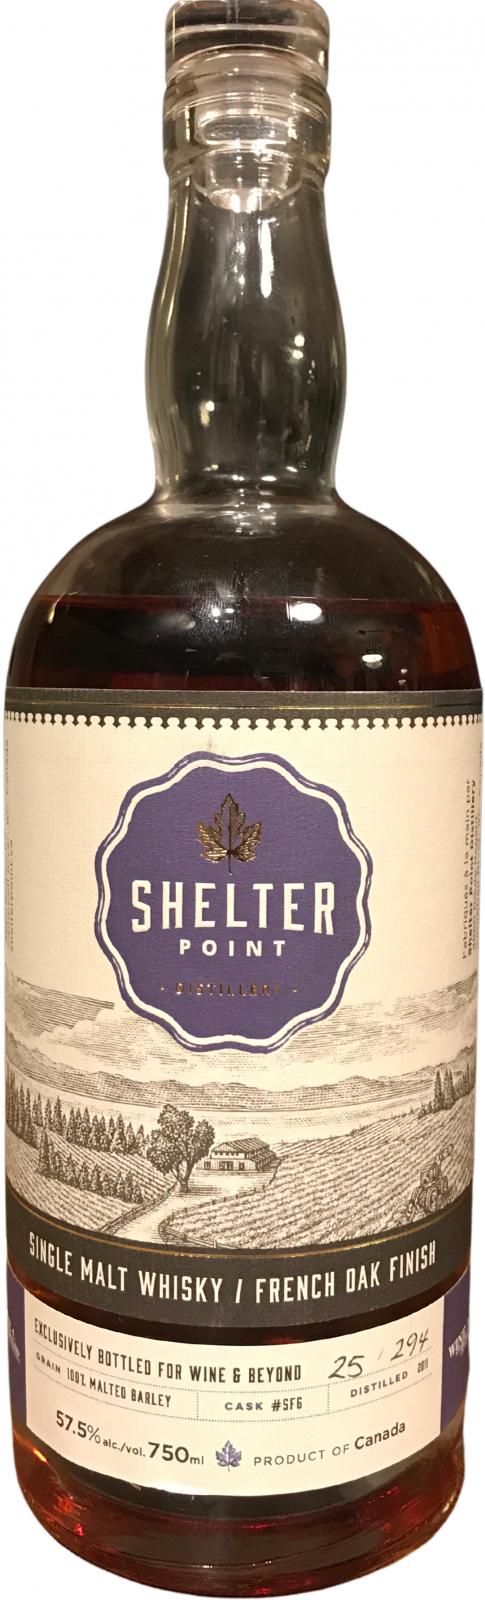 Shelter Point 2011 French Oak SF6 Wine and beyond 57.5% 750ml